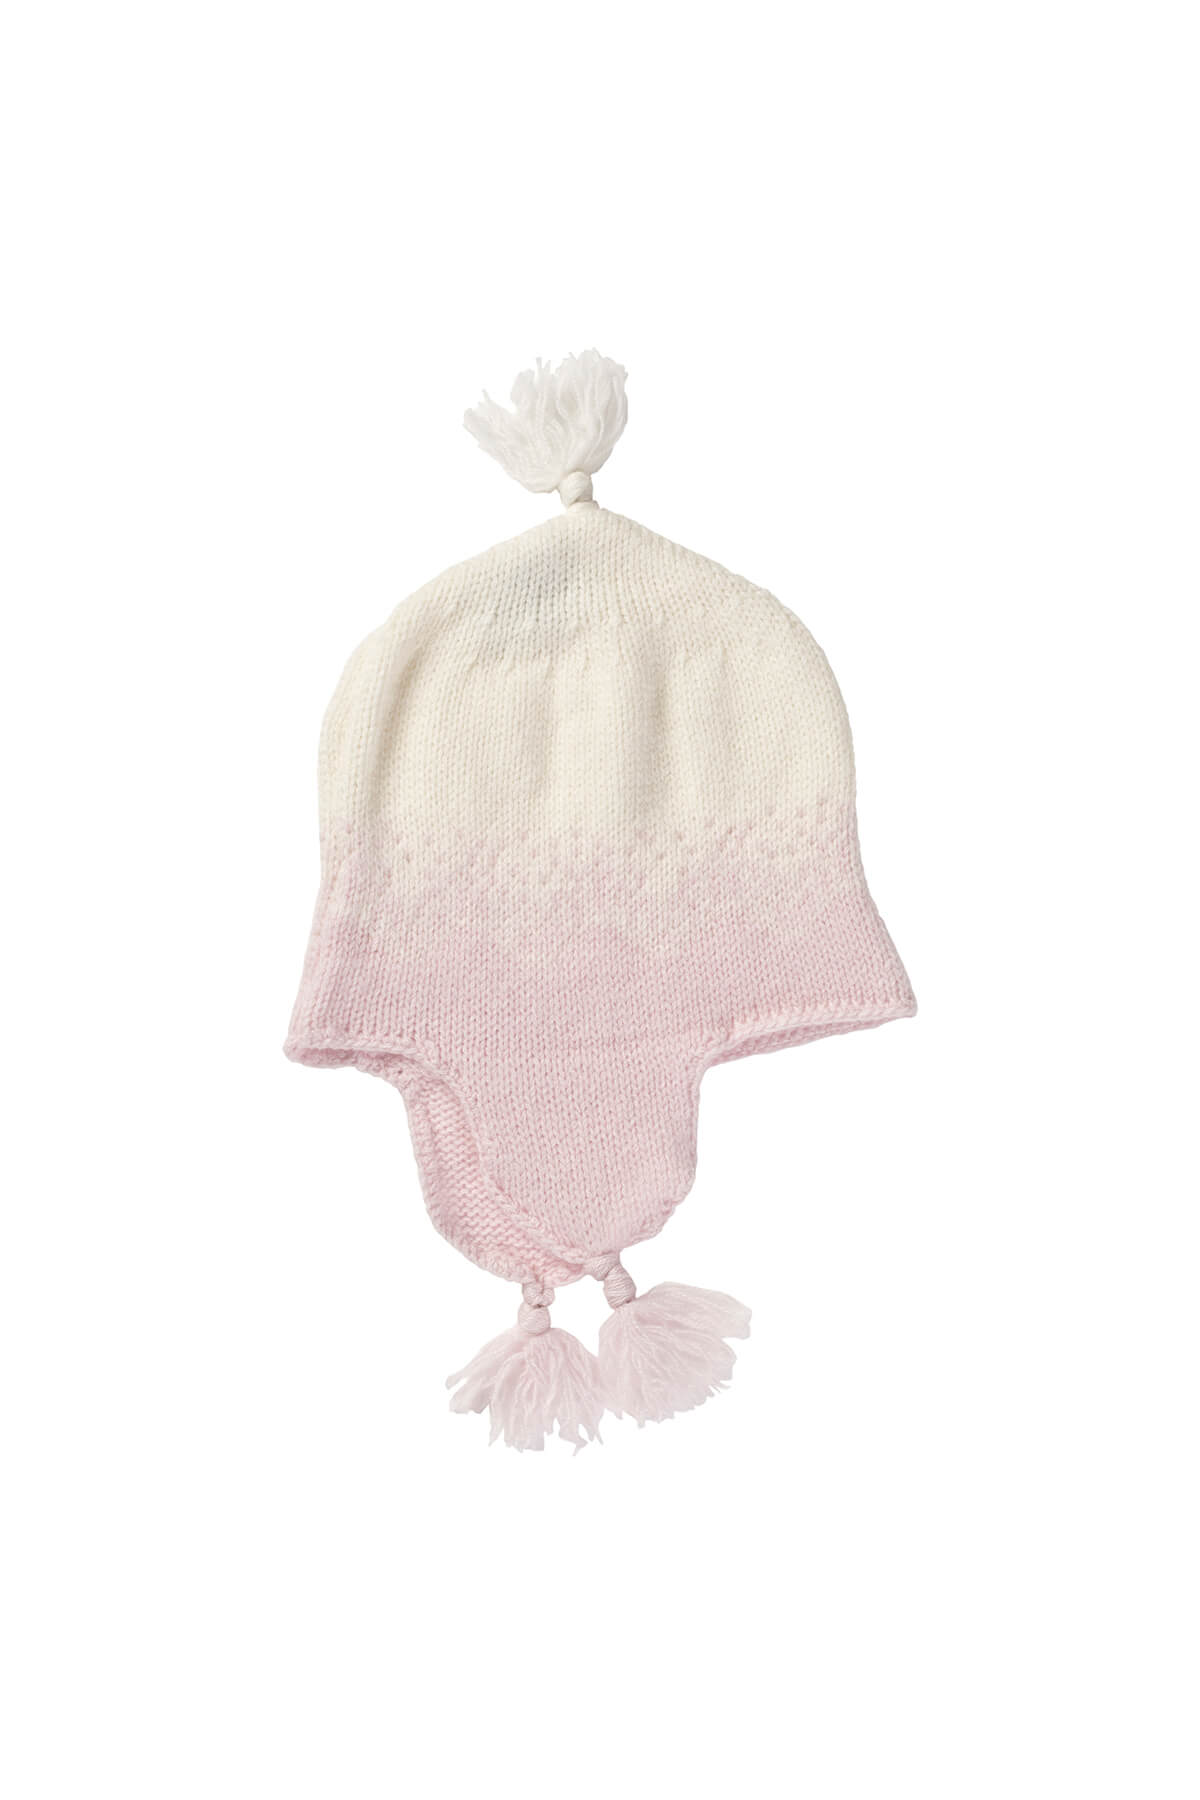 Johnstons of Elgin Gift Set includes our Cashmere Ombre Baby Hat, Mittens & Booties in Blush on white background AW21GIFTSET22B